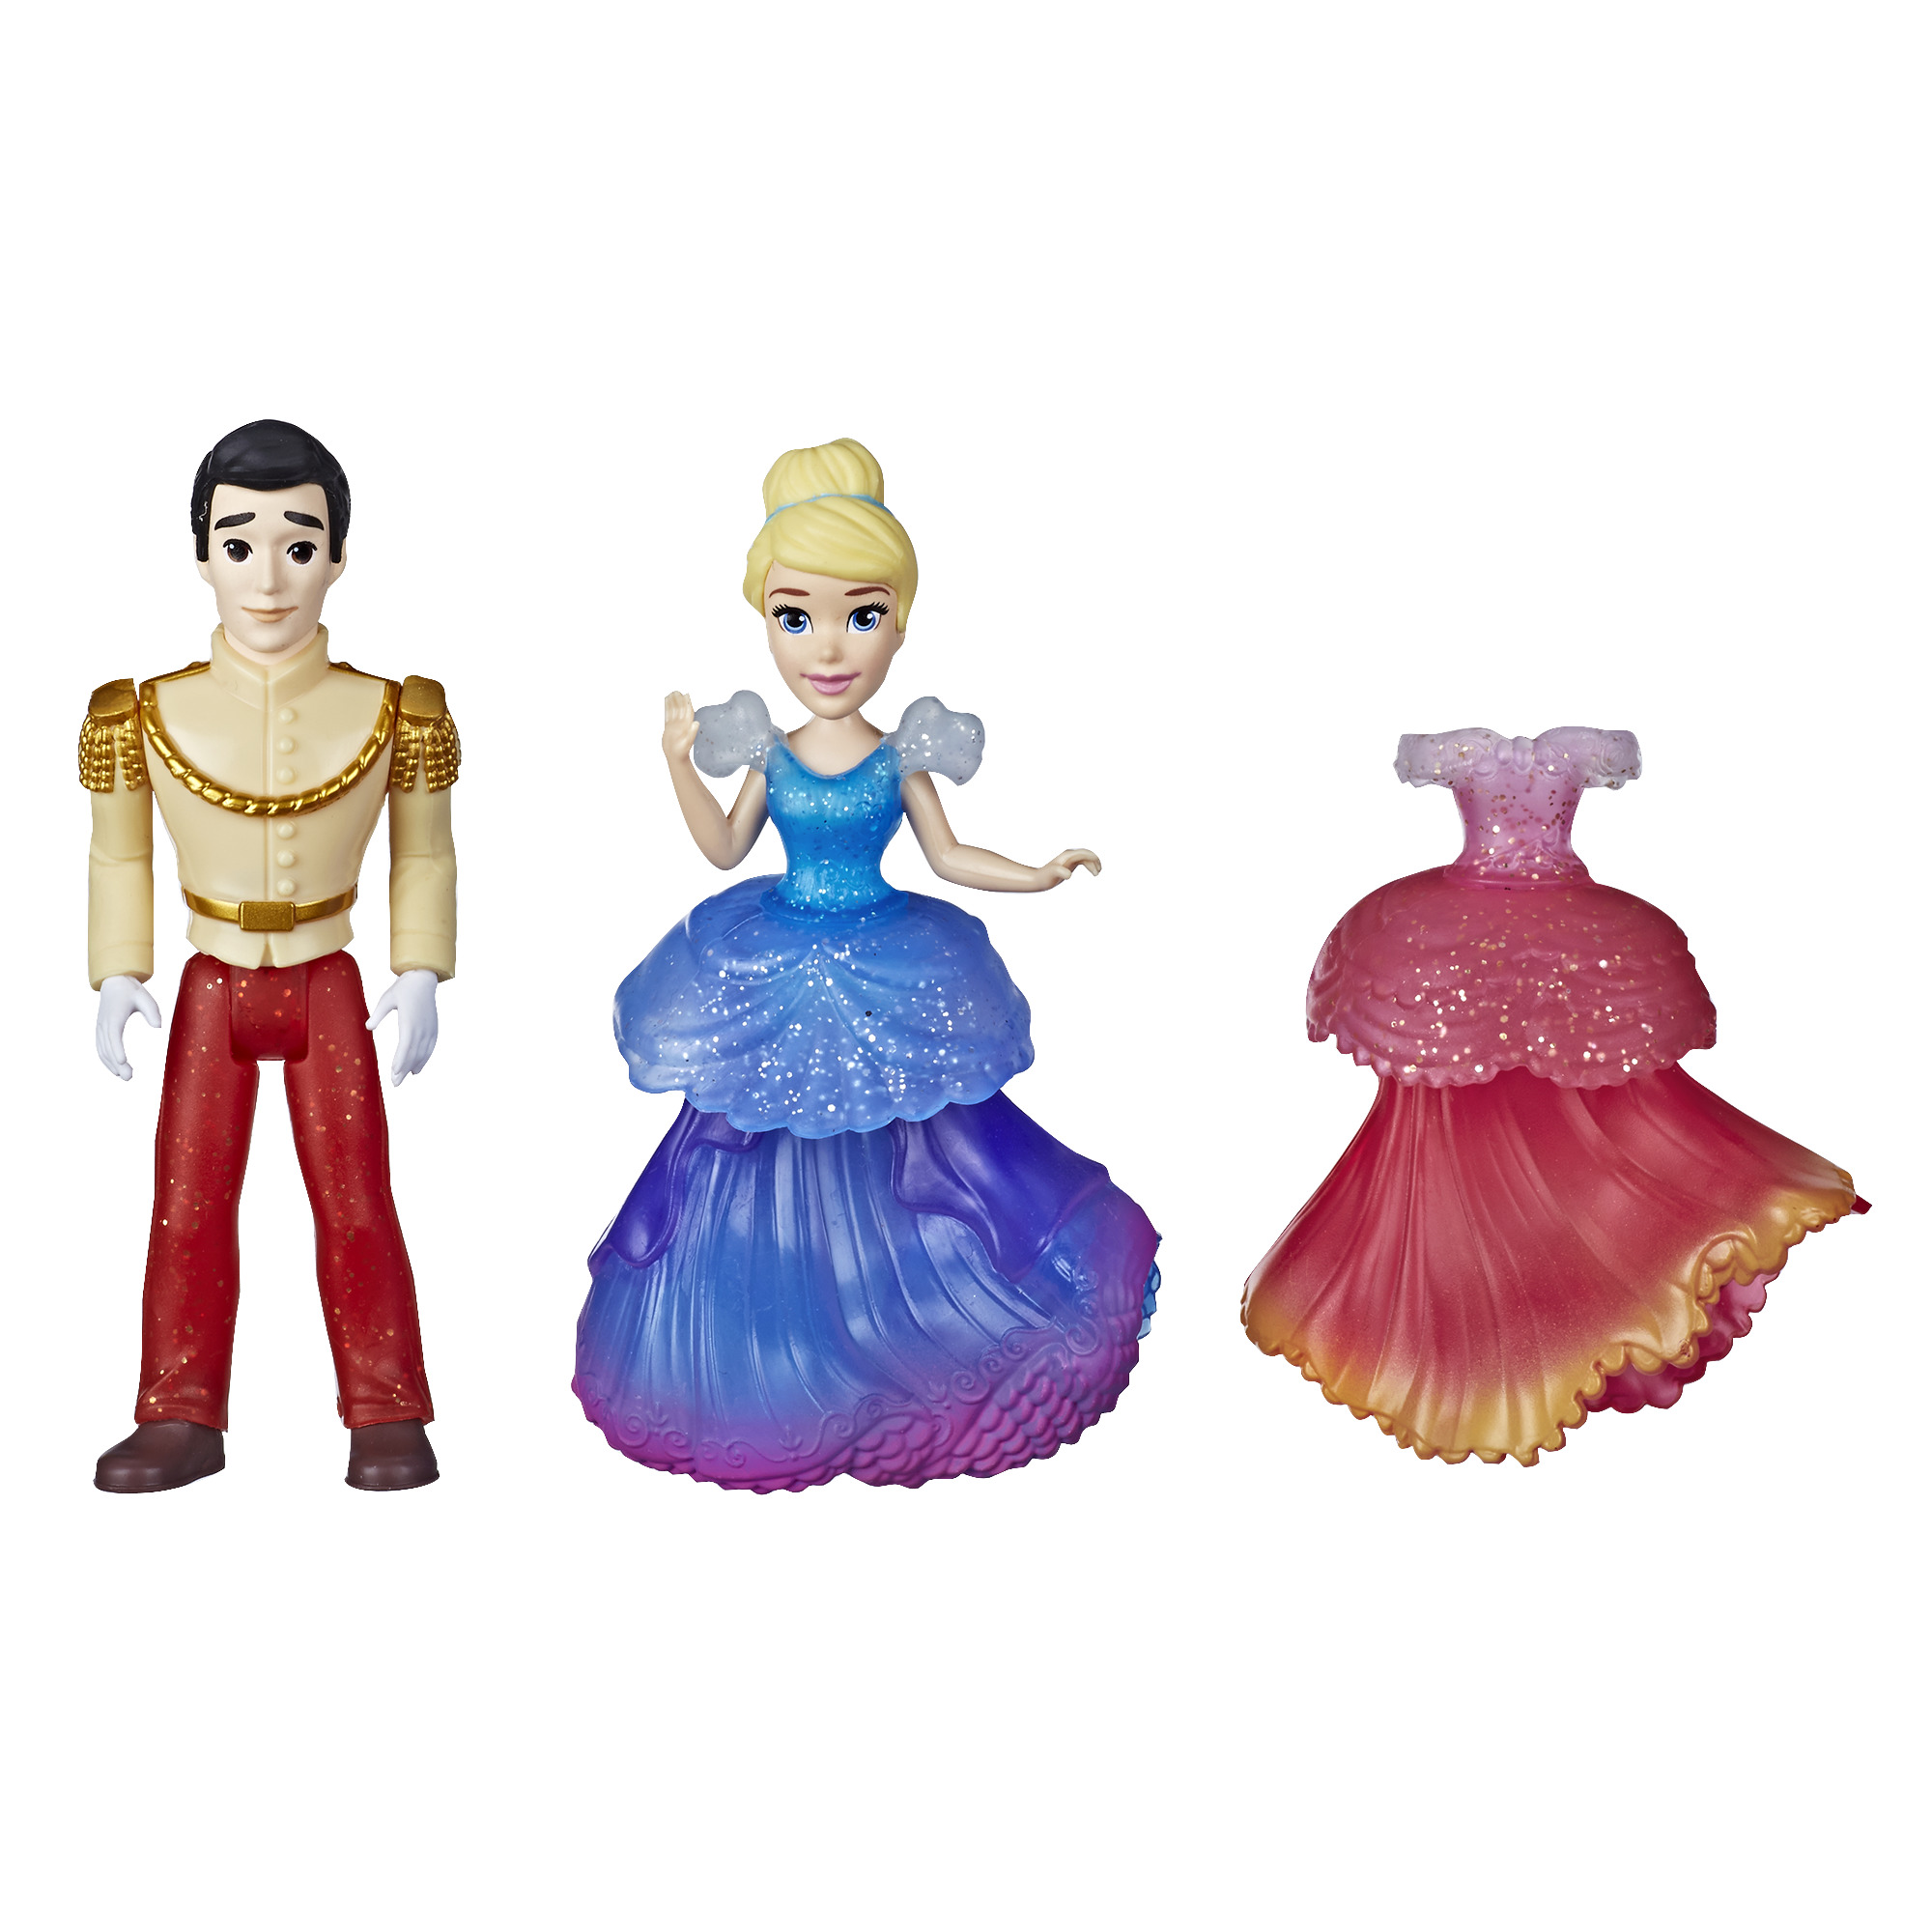 Disney Princess Cinderella and Prince Charming, with 2 Dresses Doll Playset, 4 Pieces Included - image 1 of 11